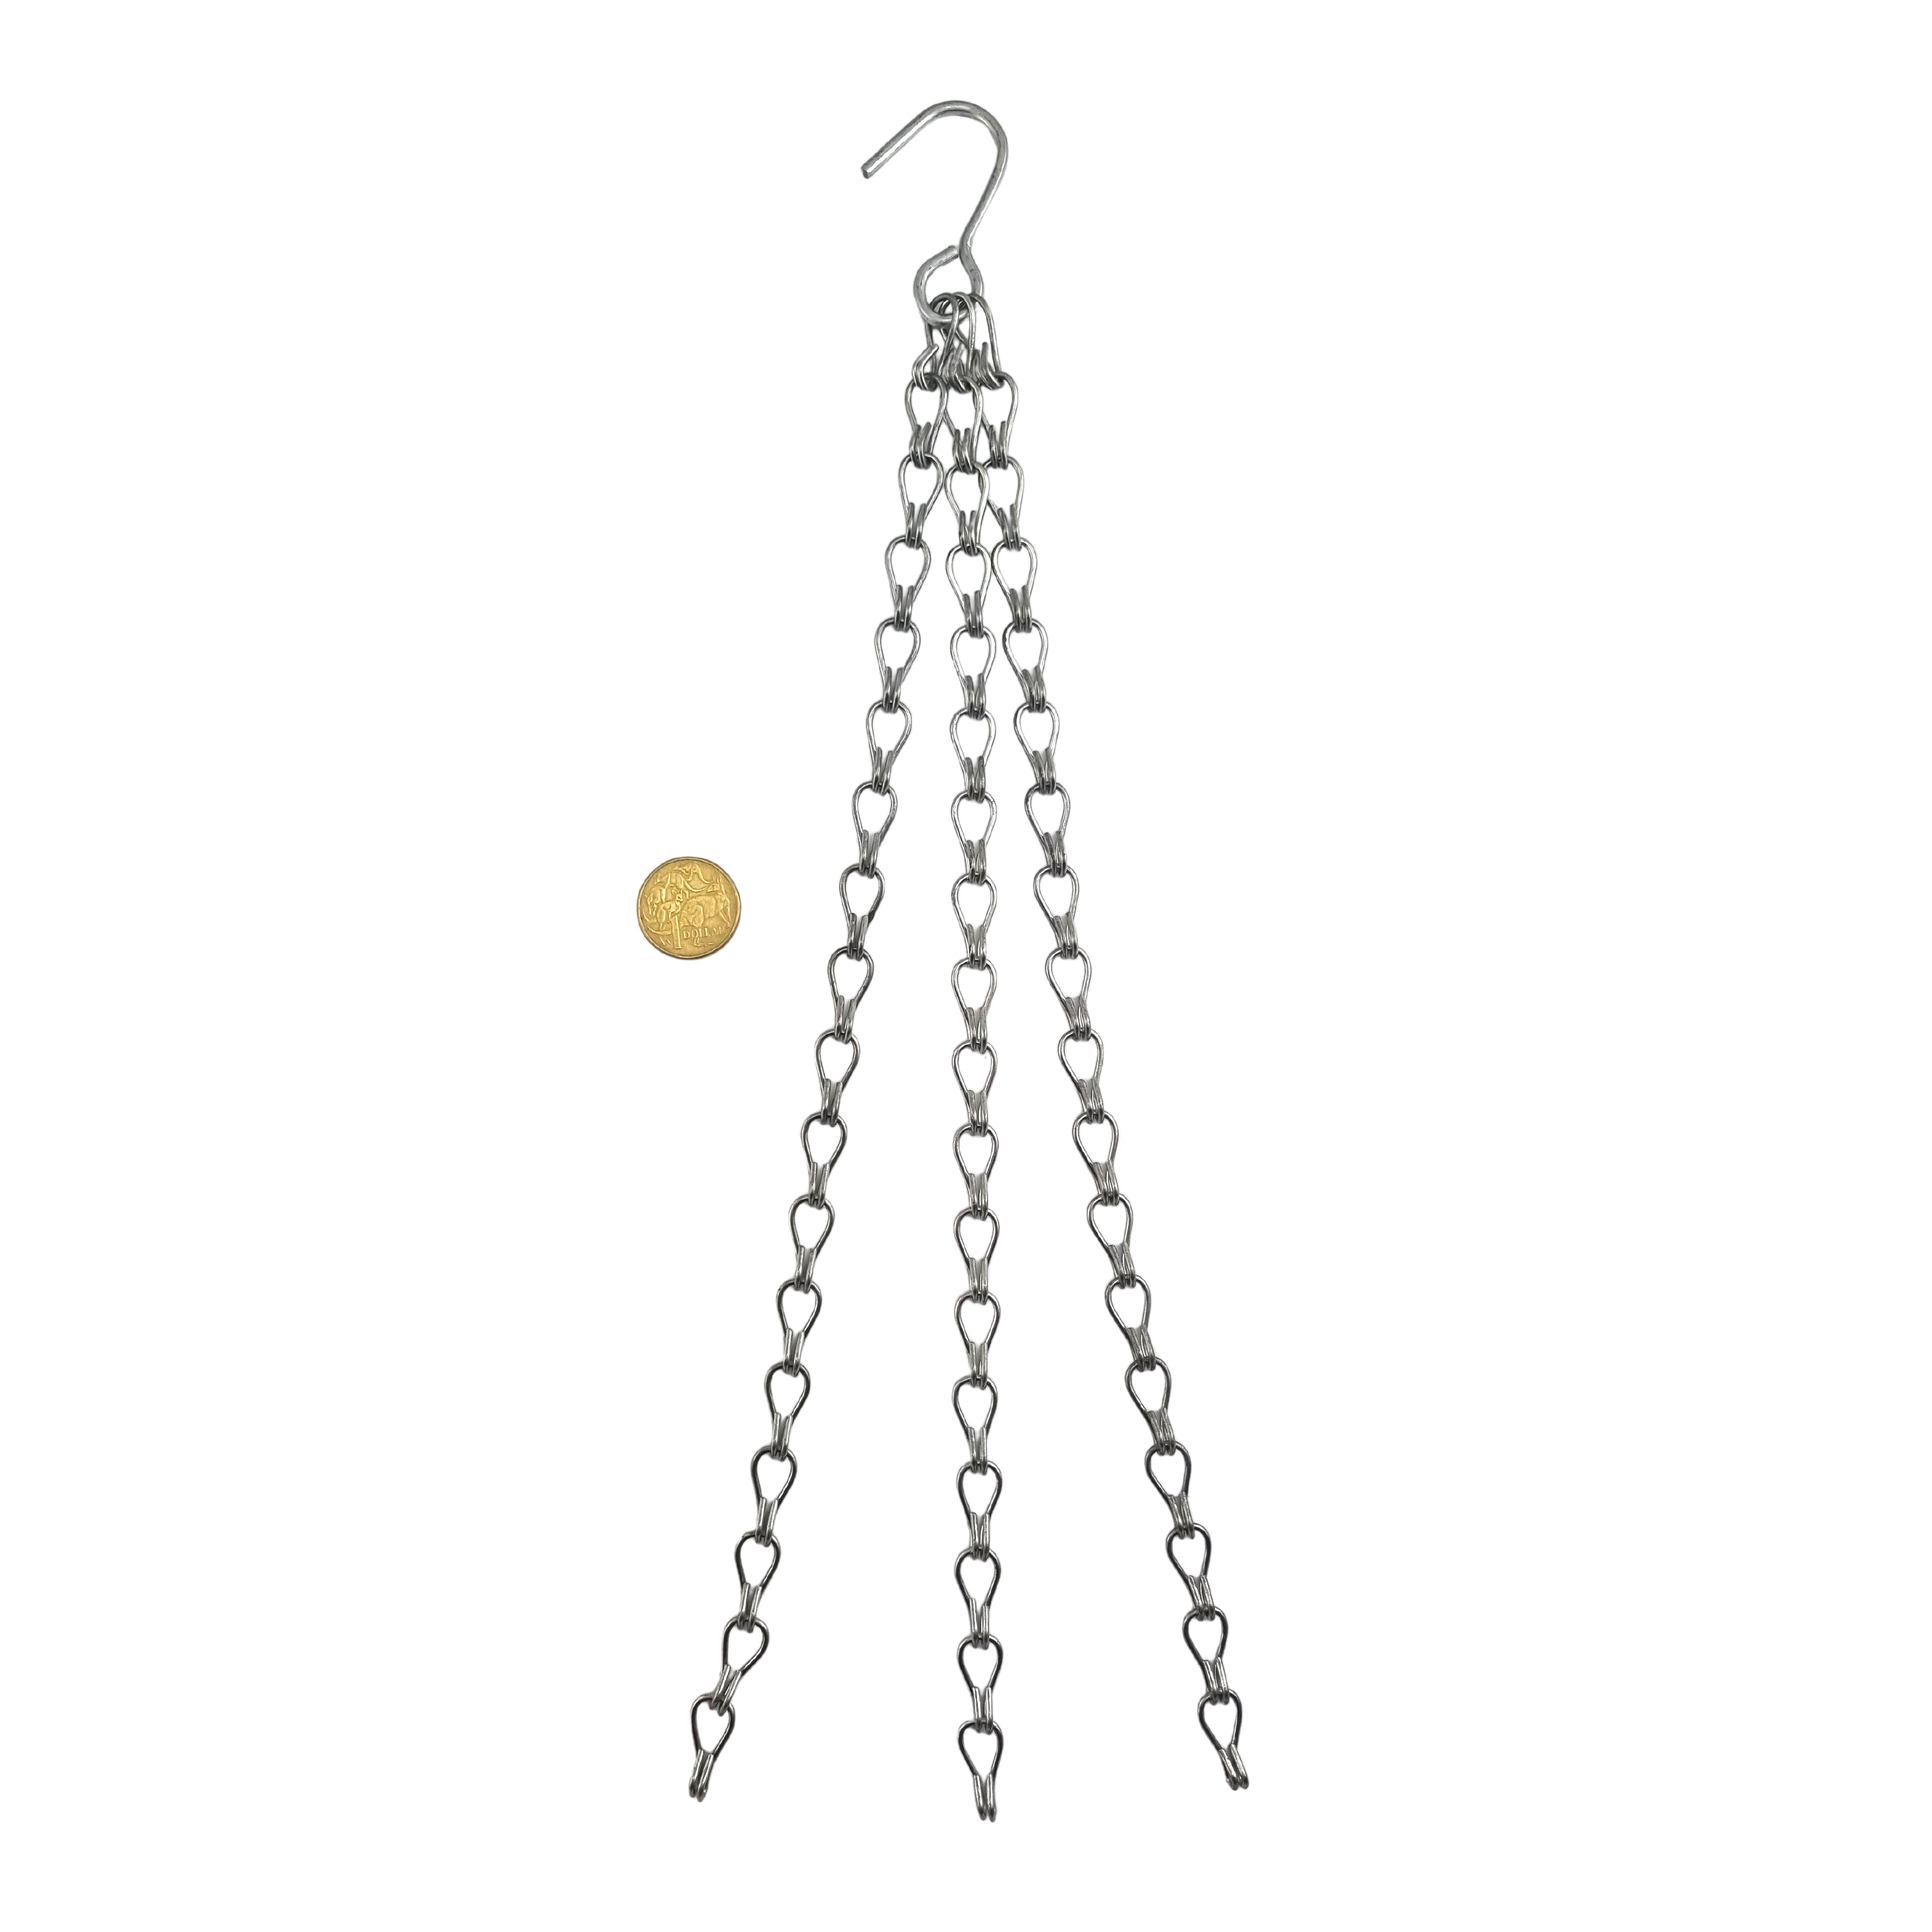 Hanging Basket Chain Sets x Qty 200 - Discontinued Stock - Price $99.00 - EMAIL or CALL TO ORDER